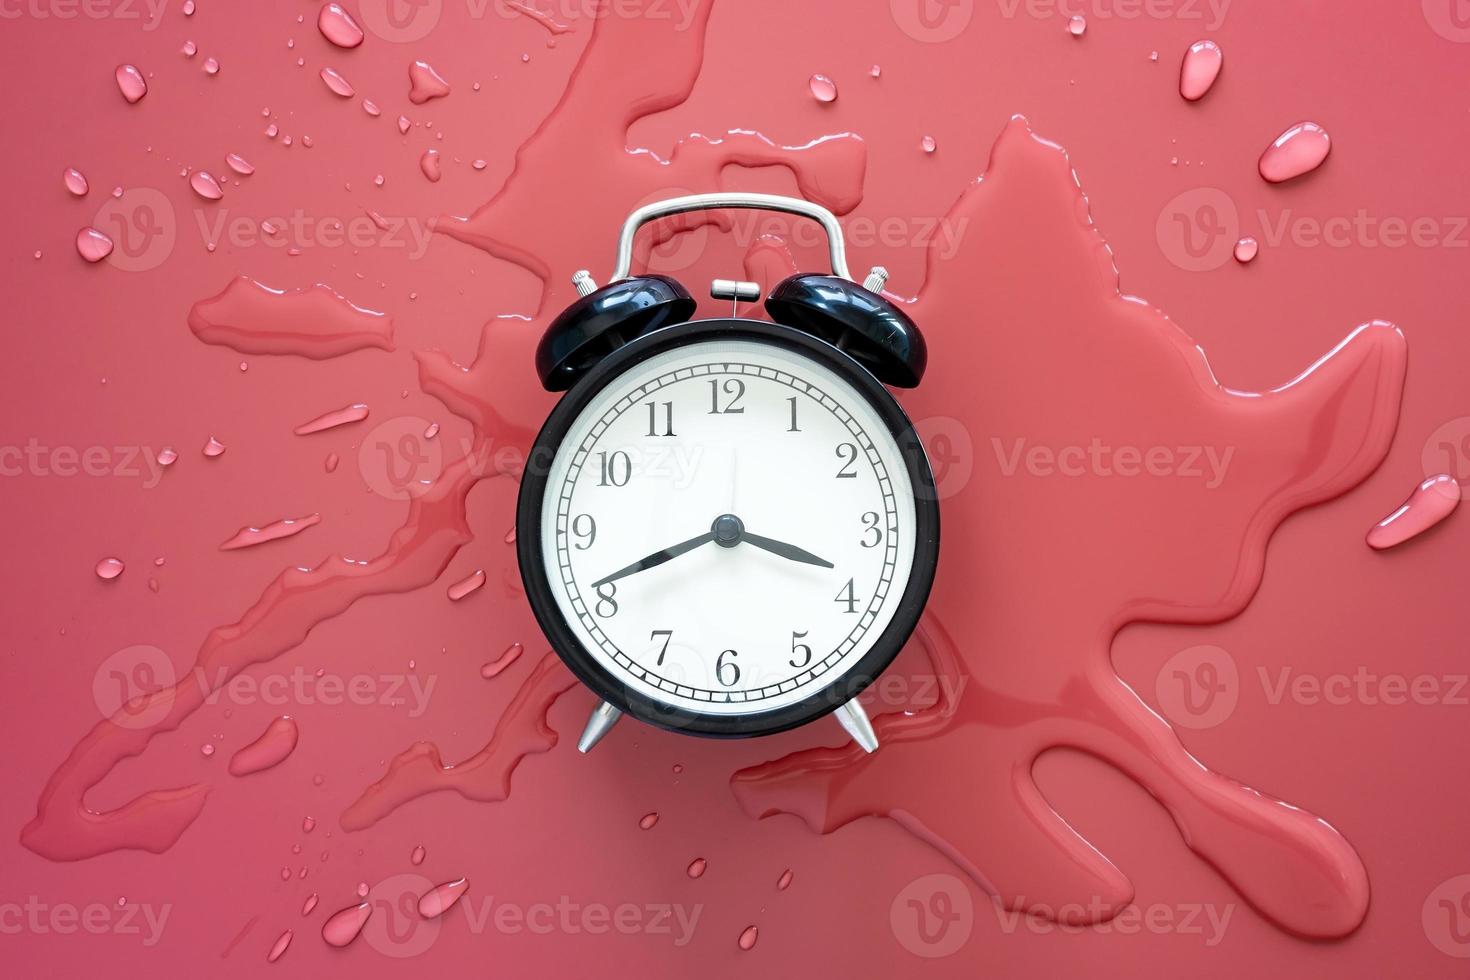 Black retro alarm clock in a pool of spilled water on a red background. Top view. photo